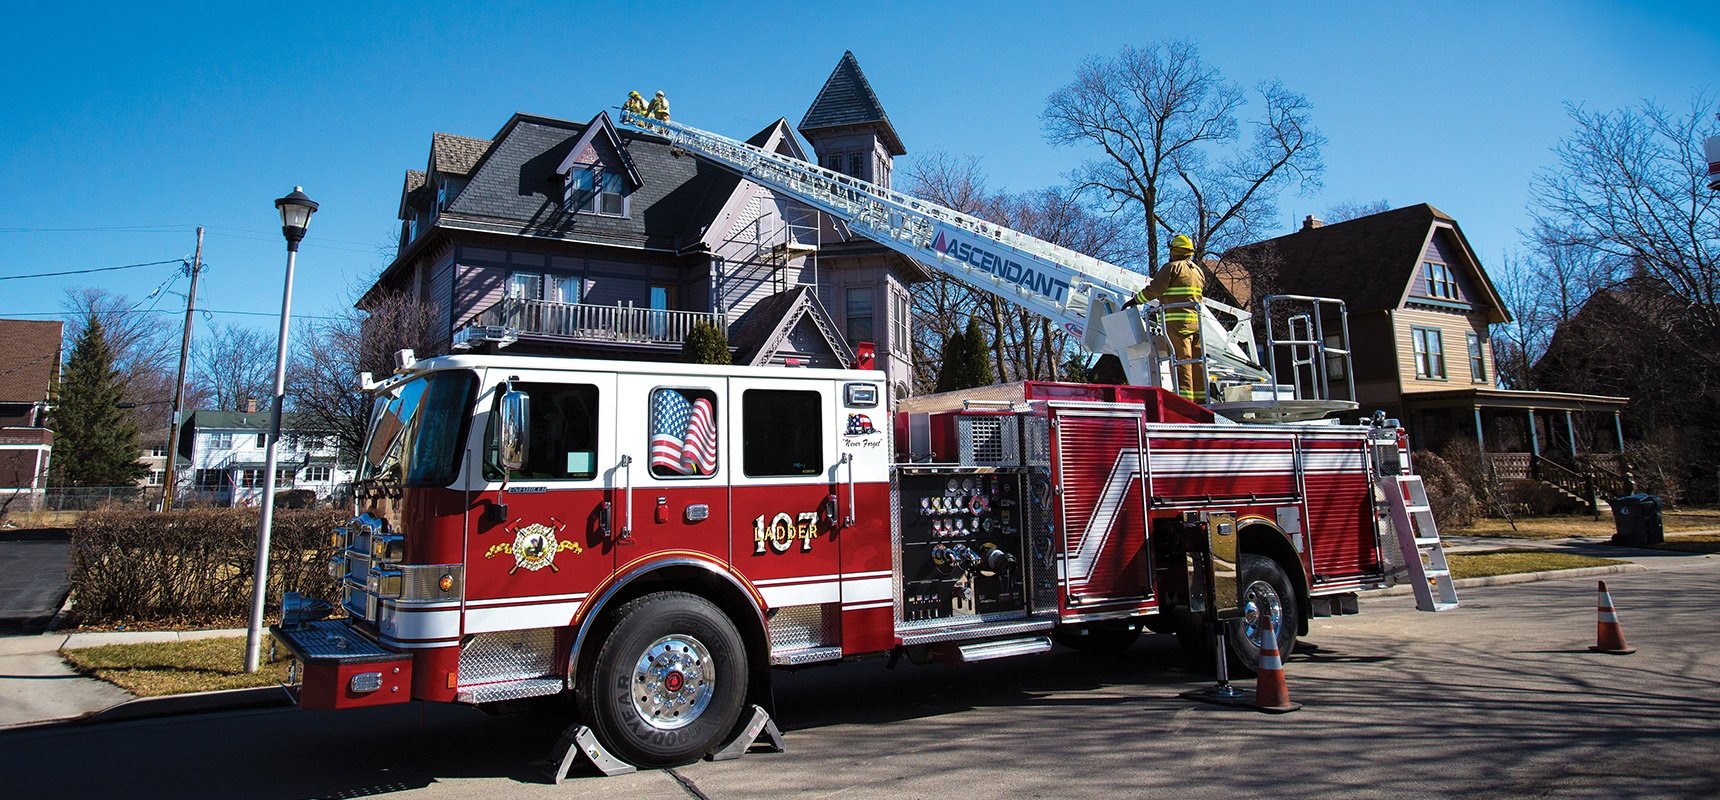 New-Pierce-Ascendant-Aerial-Ladder-Delivers-107-Foot-Vertical-Reach-On-A-Single-Rear-Axle-Configuration_Header.jpg